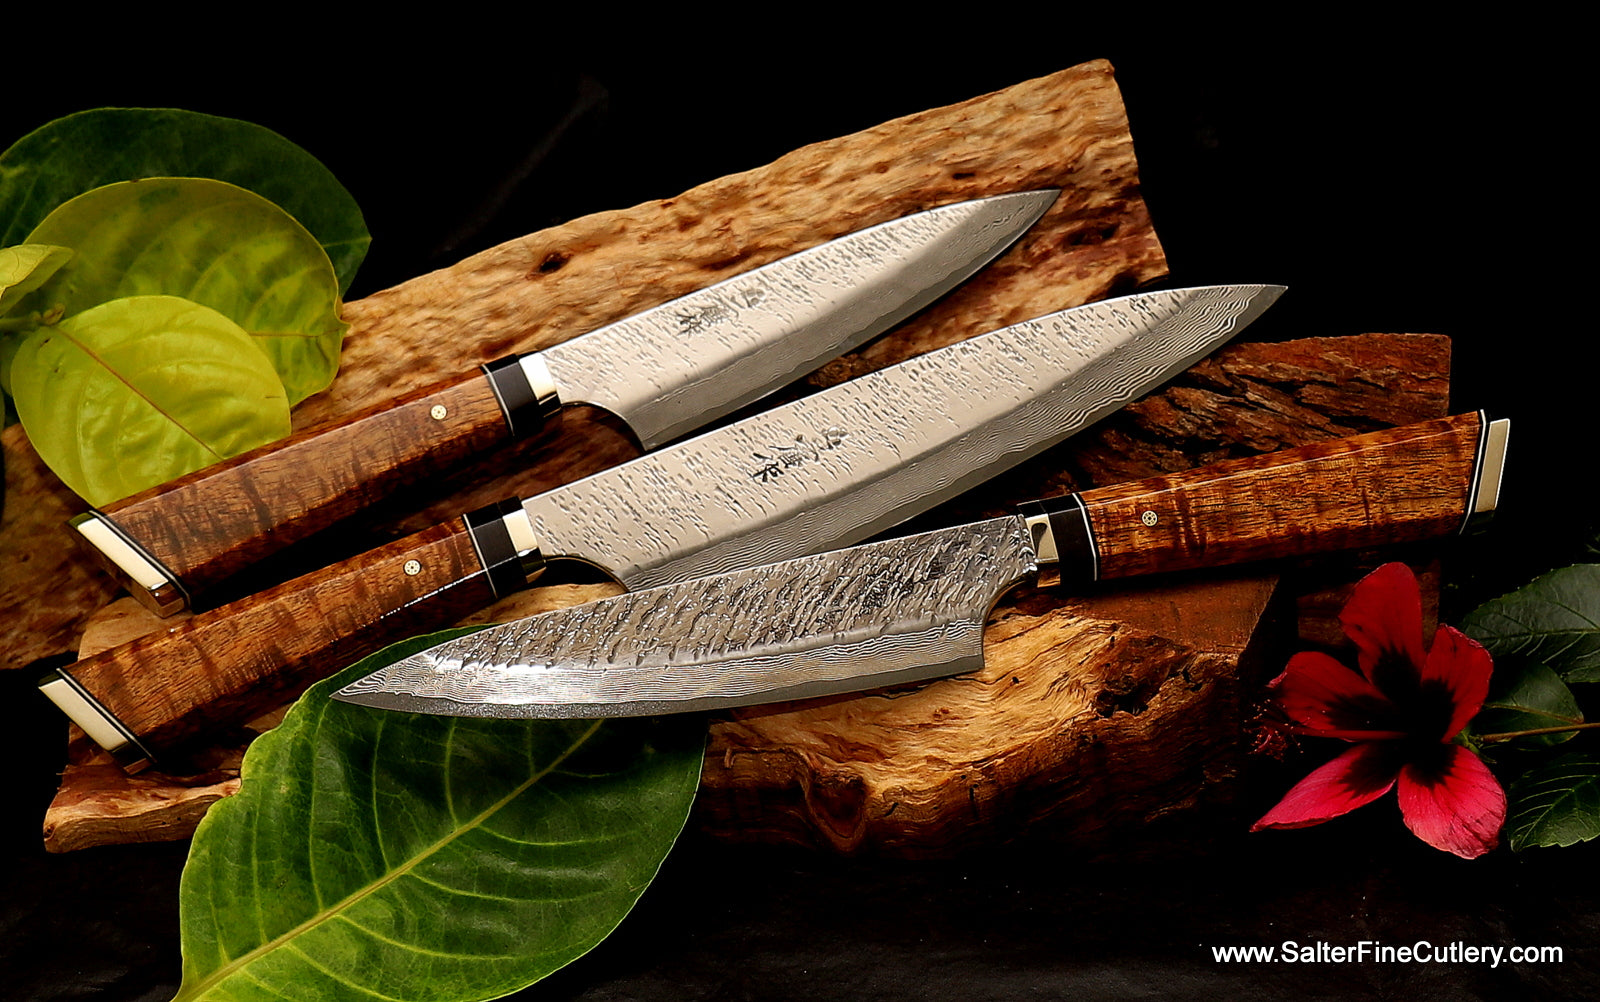 https://cdn.shopify.com/s/files/1/0993/8330/files/3-pc_Chef_knife_set_Raptor_design_with_extra_decorative_handles_by_Salter_Fine_Cutlery_6b0cf2cd-6026-4754-9f89-19f3f73e14b8.jpg?v=1590869276